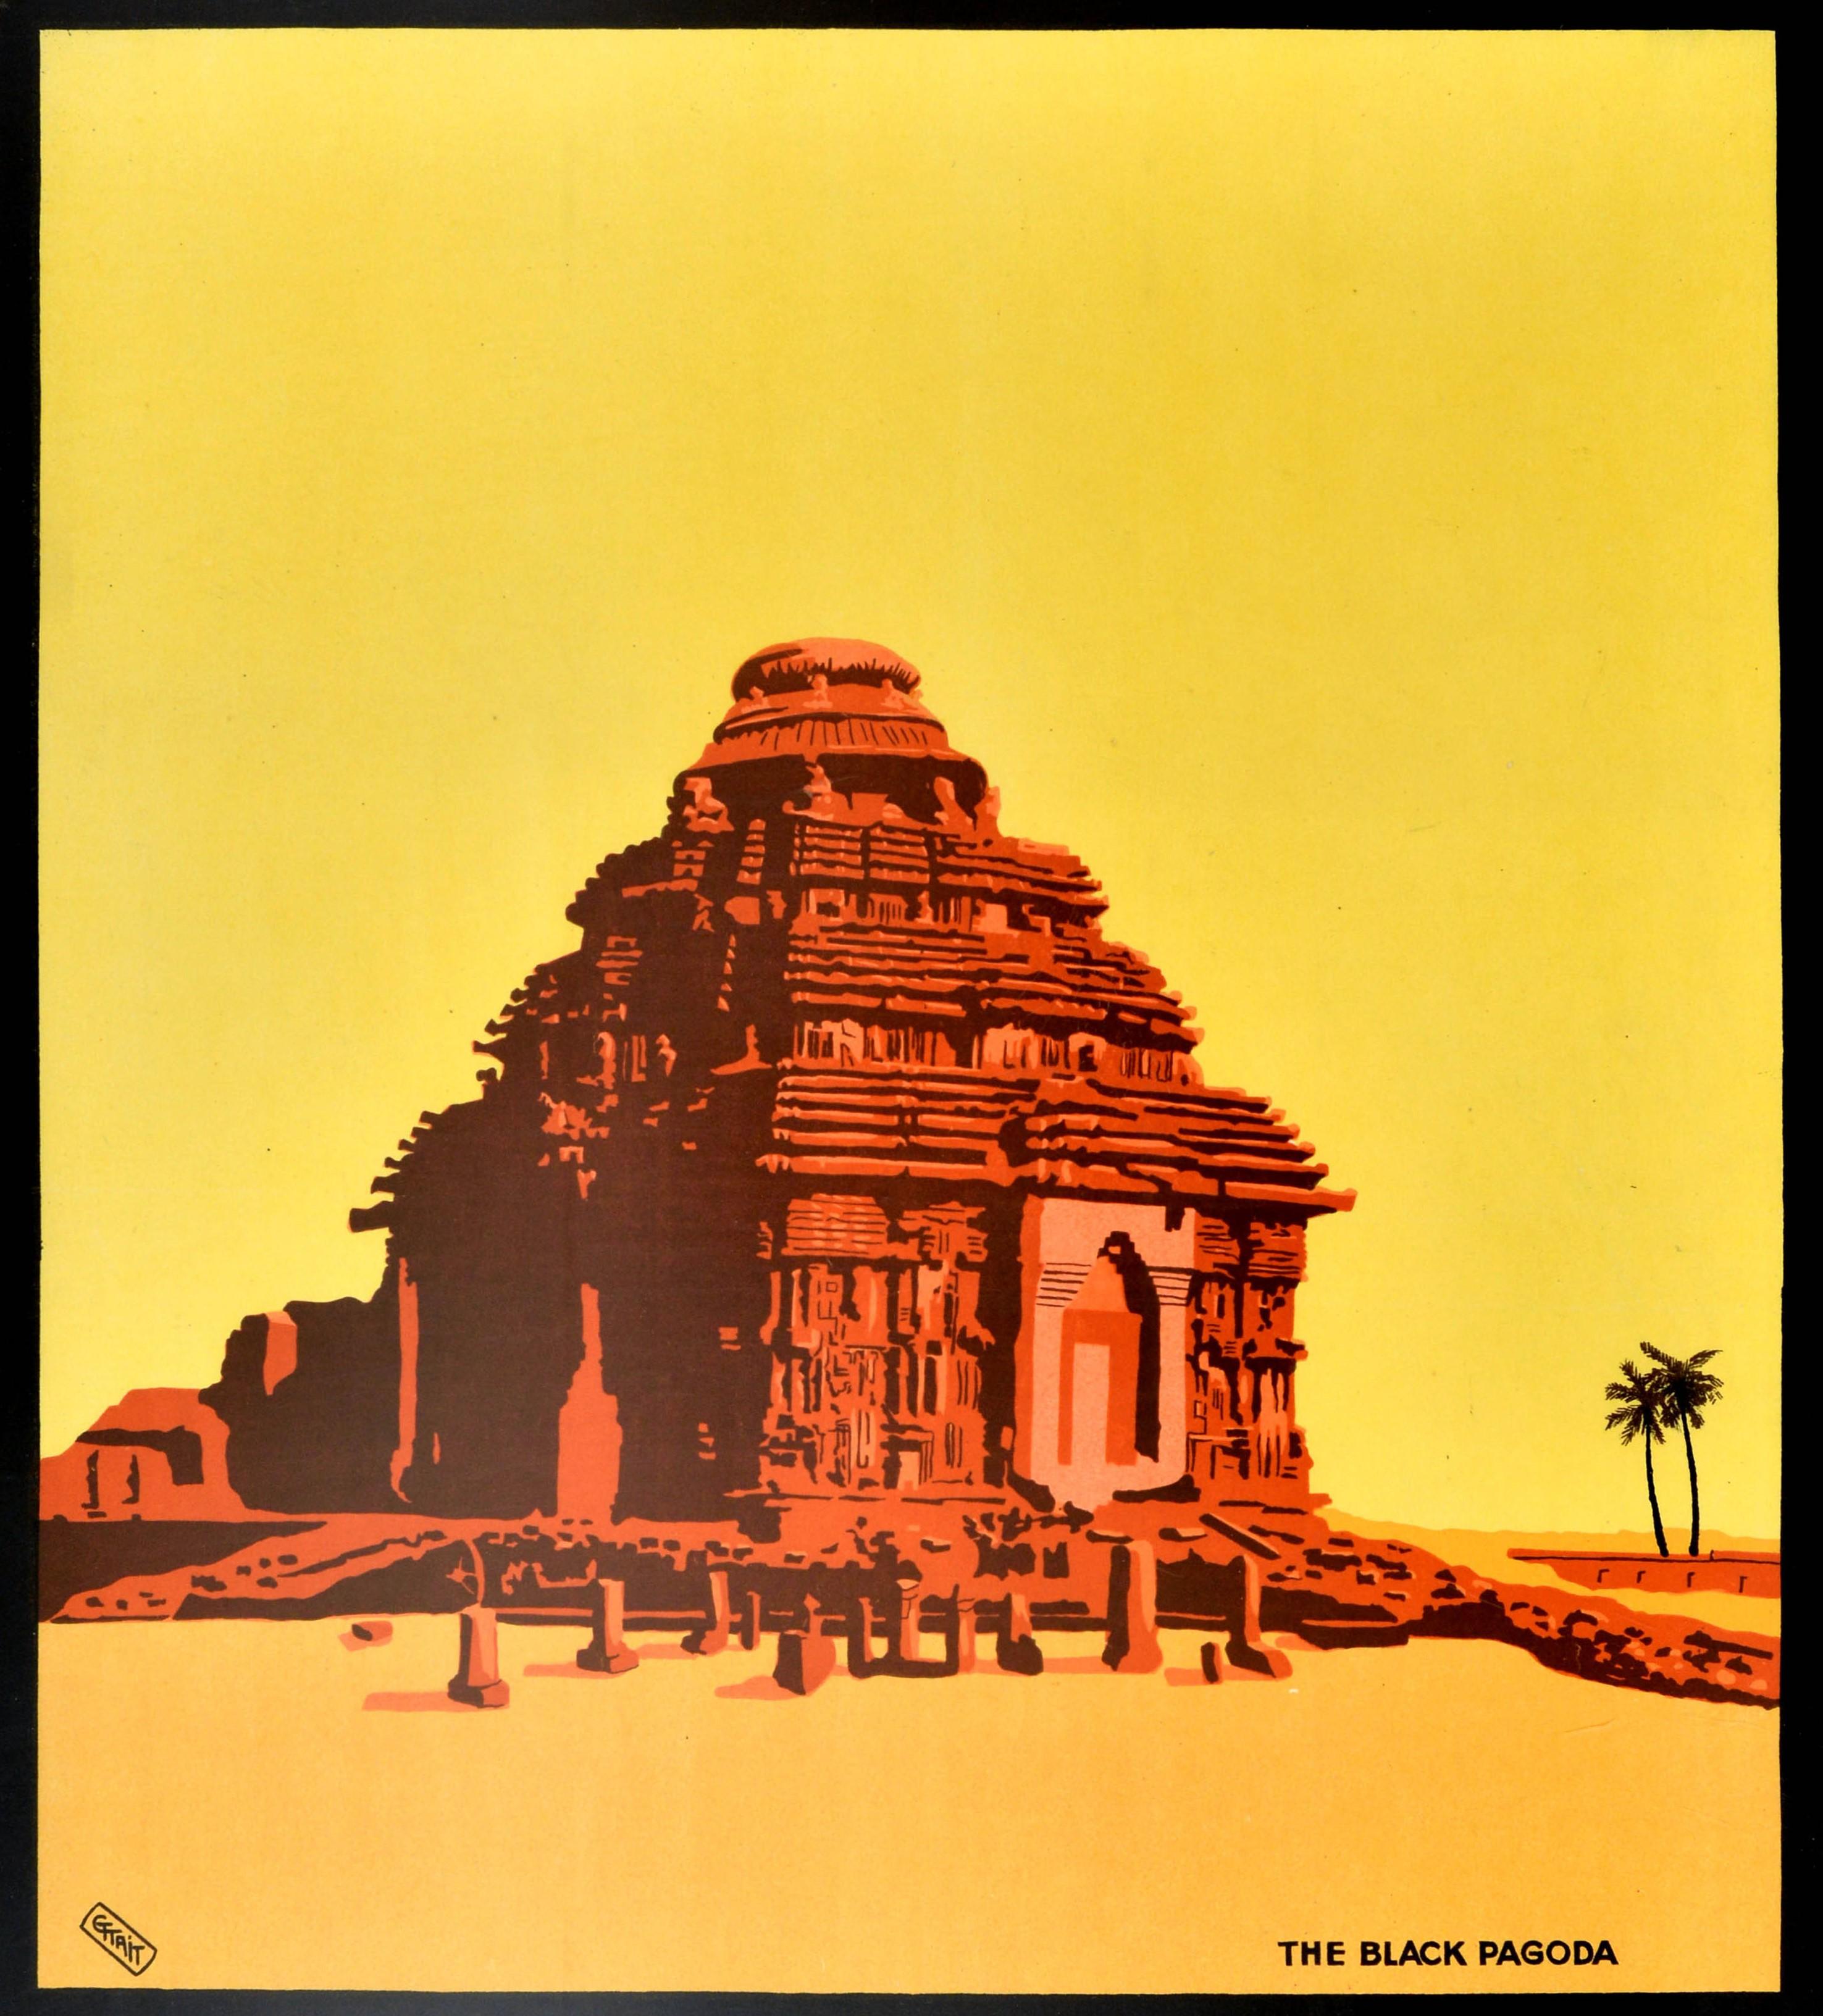 Original antique railway poster for Konarak See India Bengal Nagpur Railway featuring stunning artwork of The Black Pagoda with ruins in the foreground and palm trees on the side set against a yellow background, the bold lettering in red on the